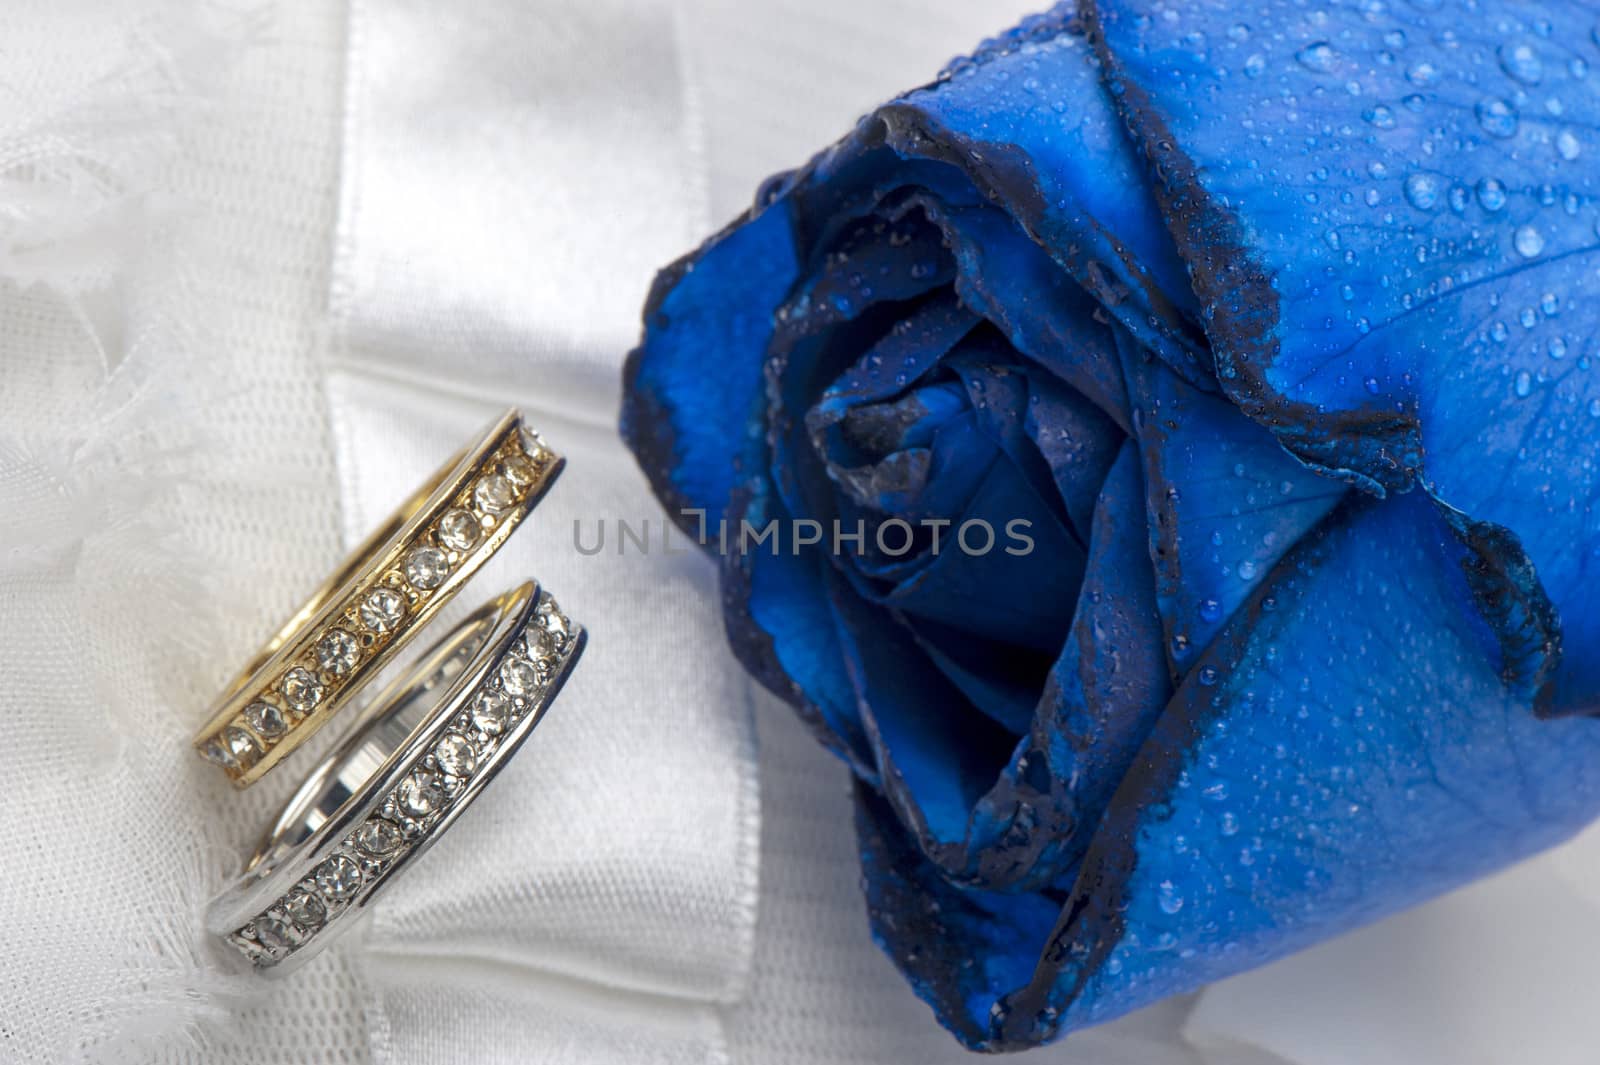  roses and wedding rings by carla720